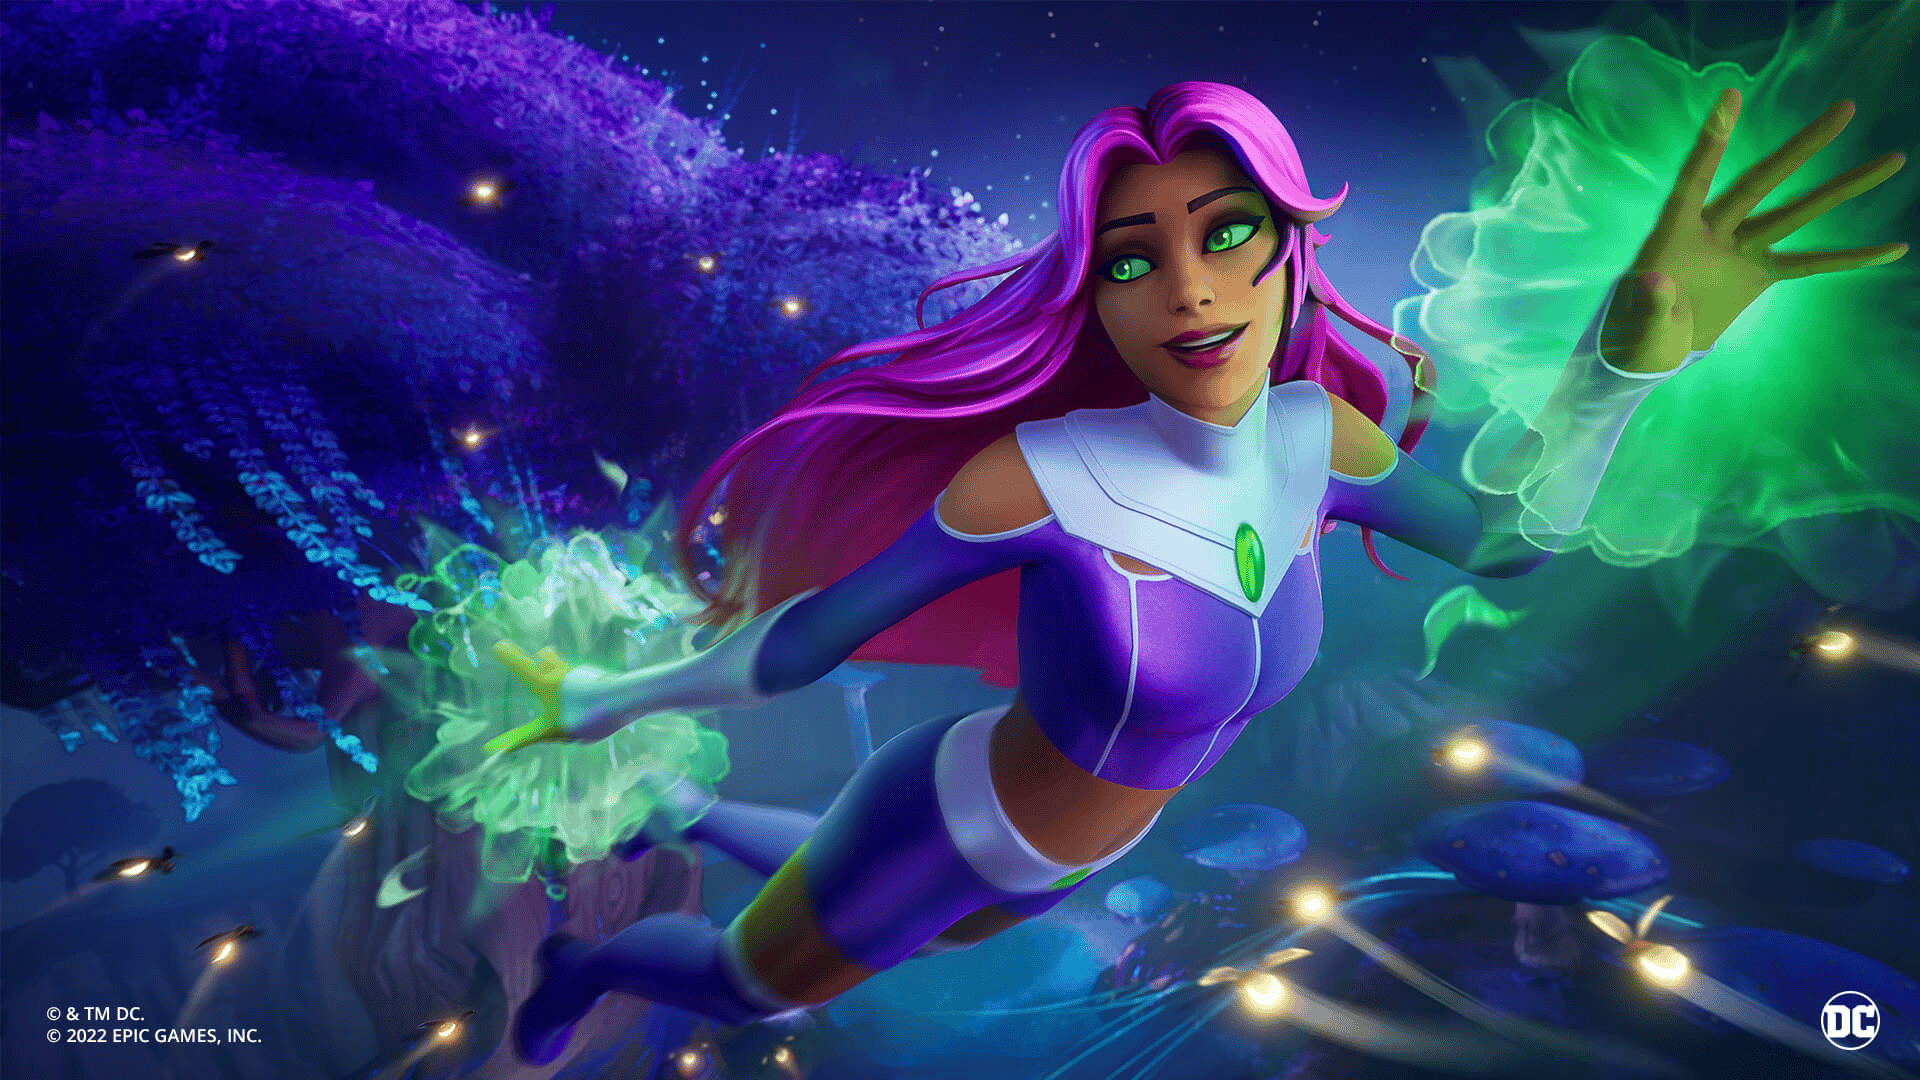 Starfire has joined the Battle Royale.